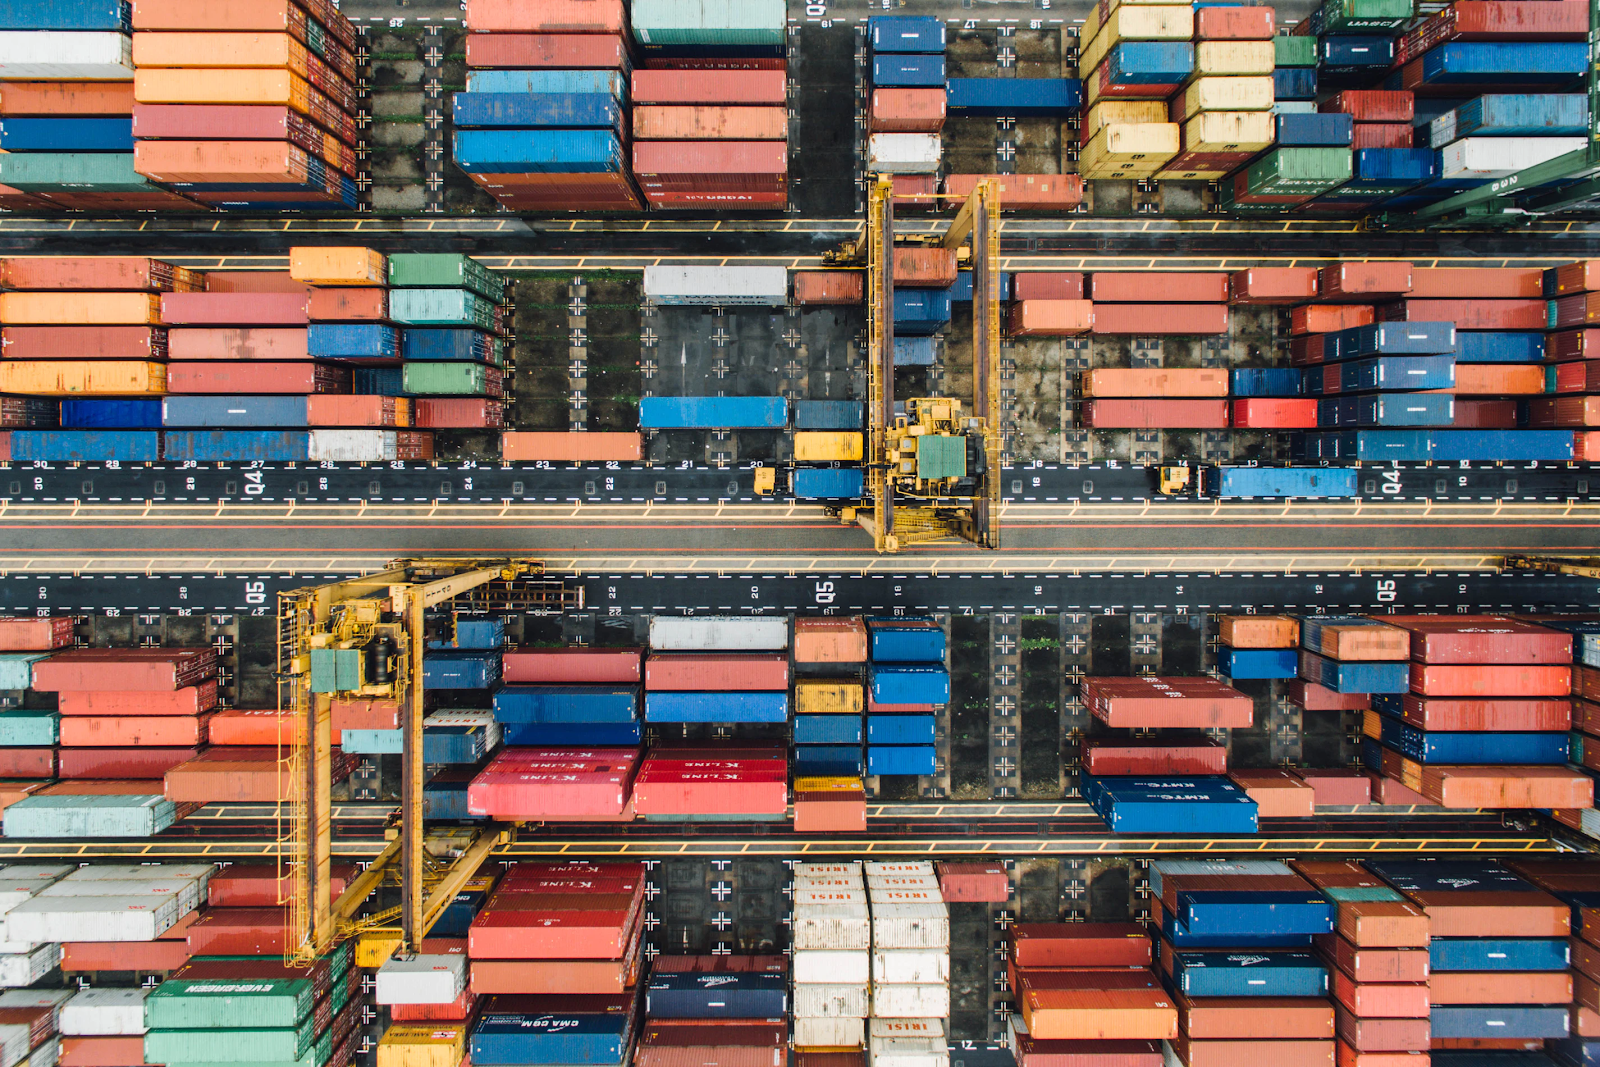 Photo of a container yard from above